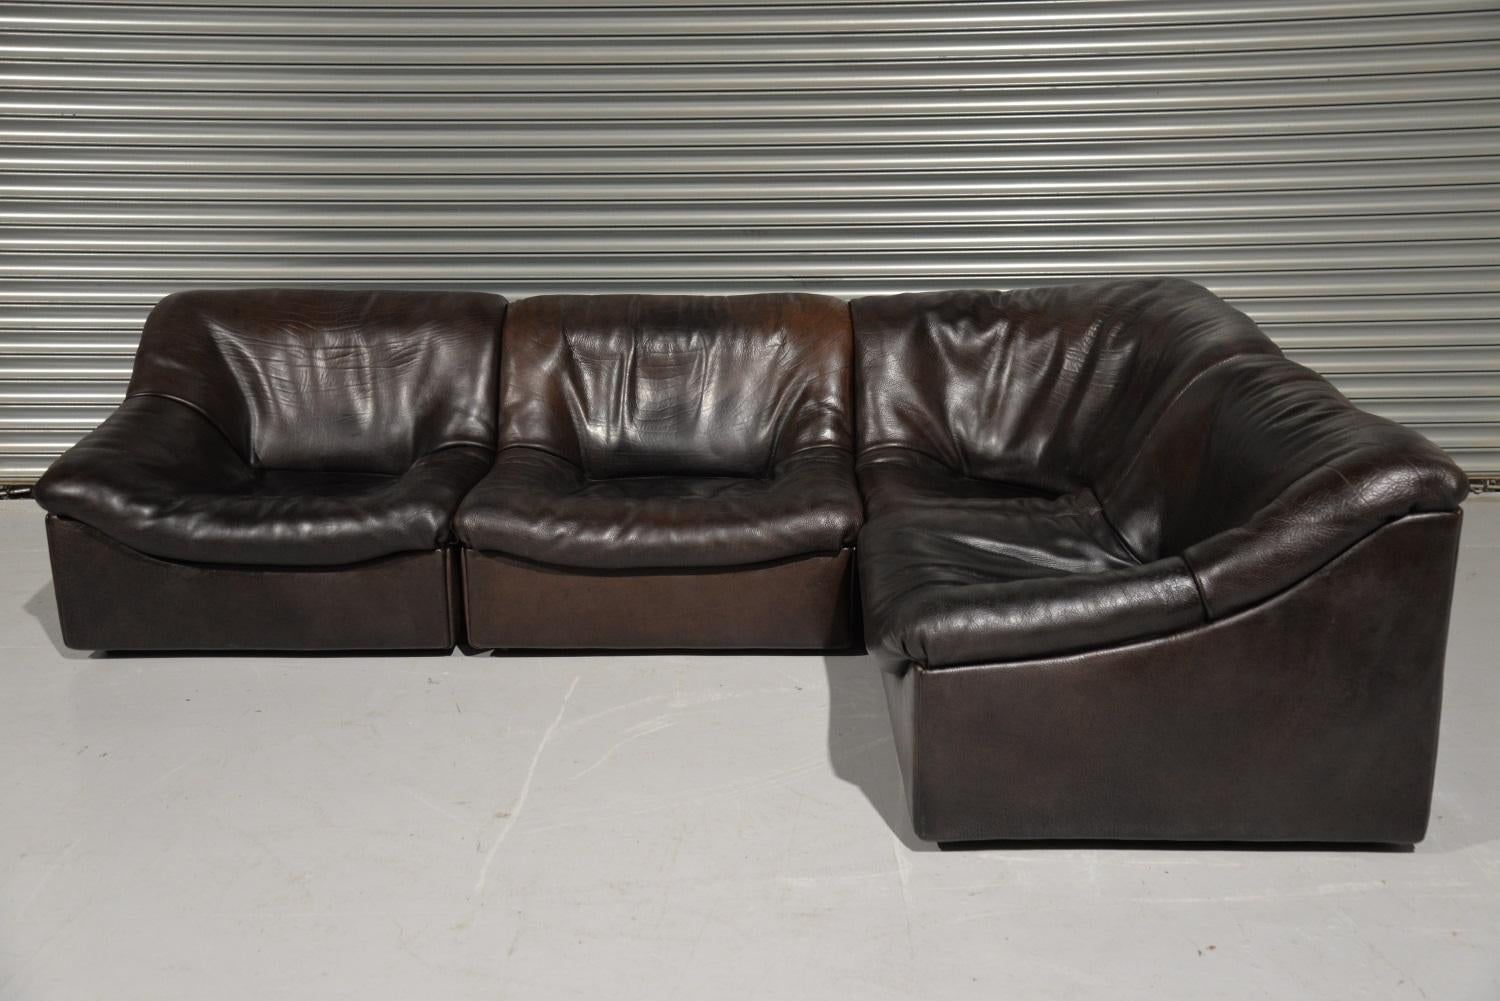 We are delighted to bring to you a beautiful sectional model DS 46 Buffalo leather sofa of the highest quality by De Sede. This sofa, consisting of 4 elements, is made of the thickest bull hide leather. This sofa has an unique design for a modular